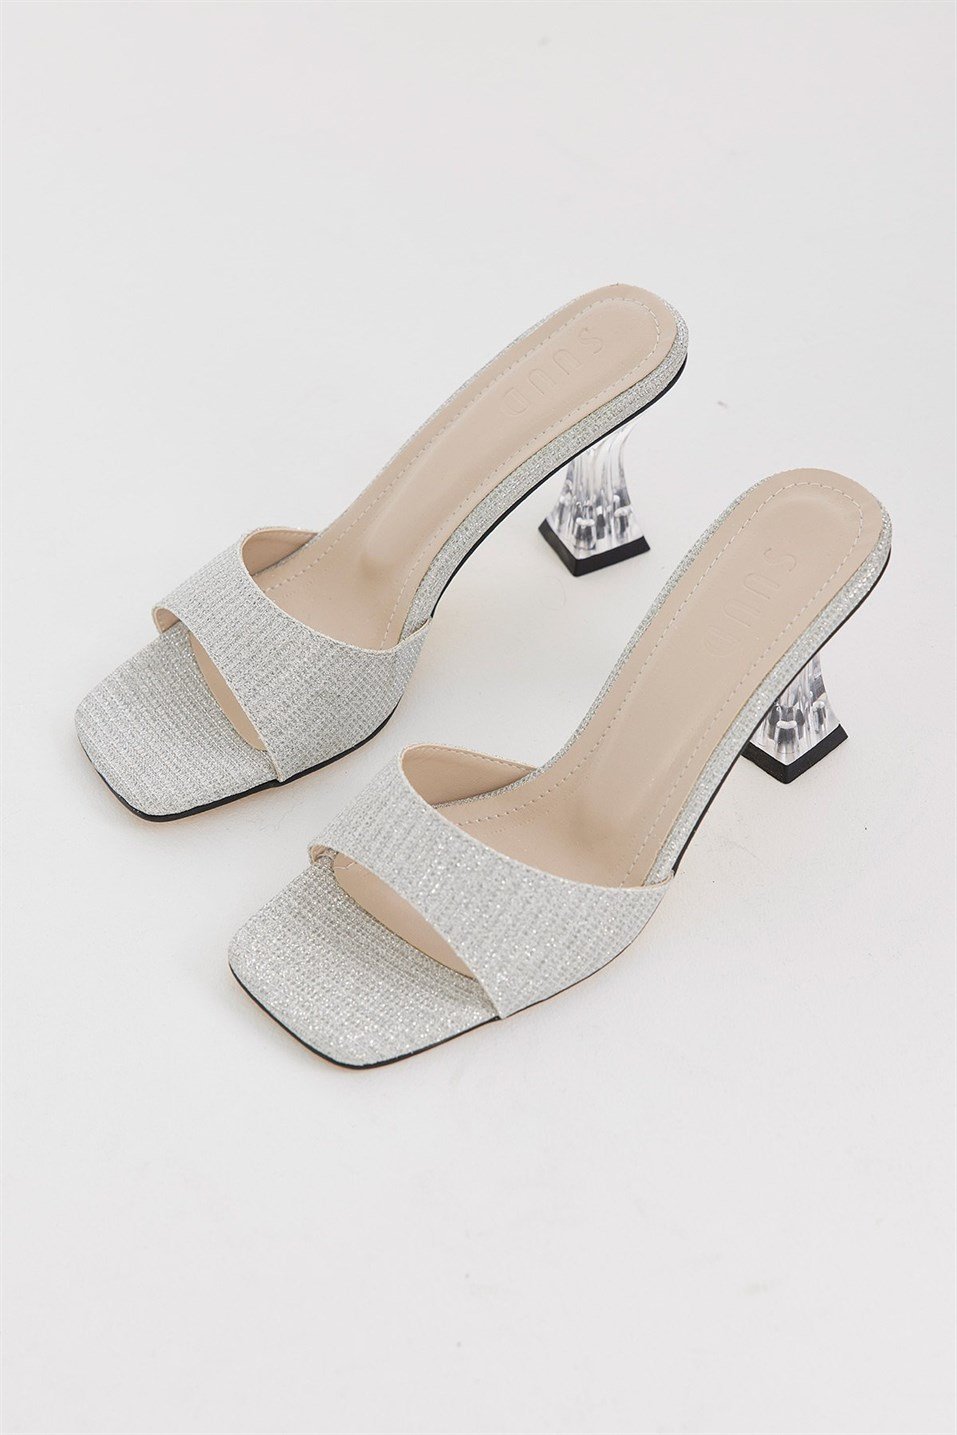 Silver Oval Banded Heels Sandals